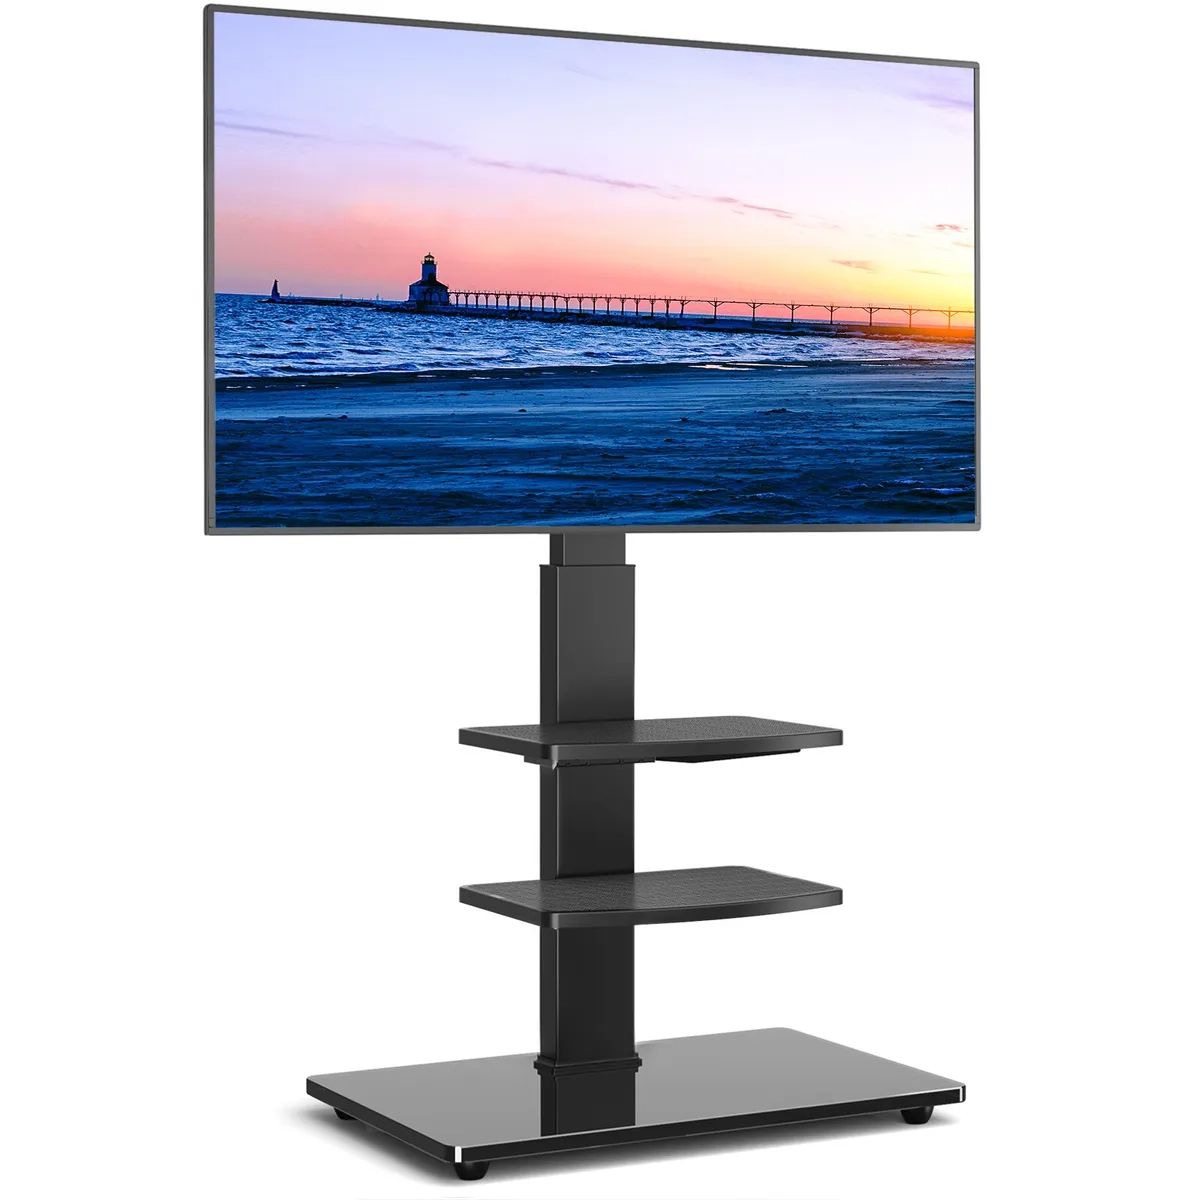 Universal Swivel Floor Tv Stand With Mount For 65 Inch Flat Screen/Curved Tv  | Ebay Intended For Stand For Flat Screen (View 3 of 15)